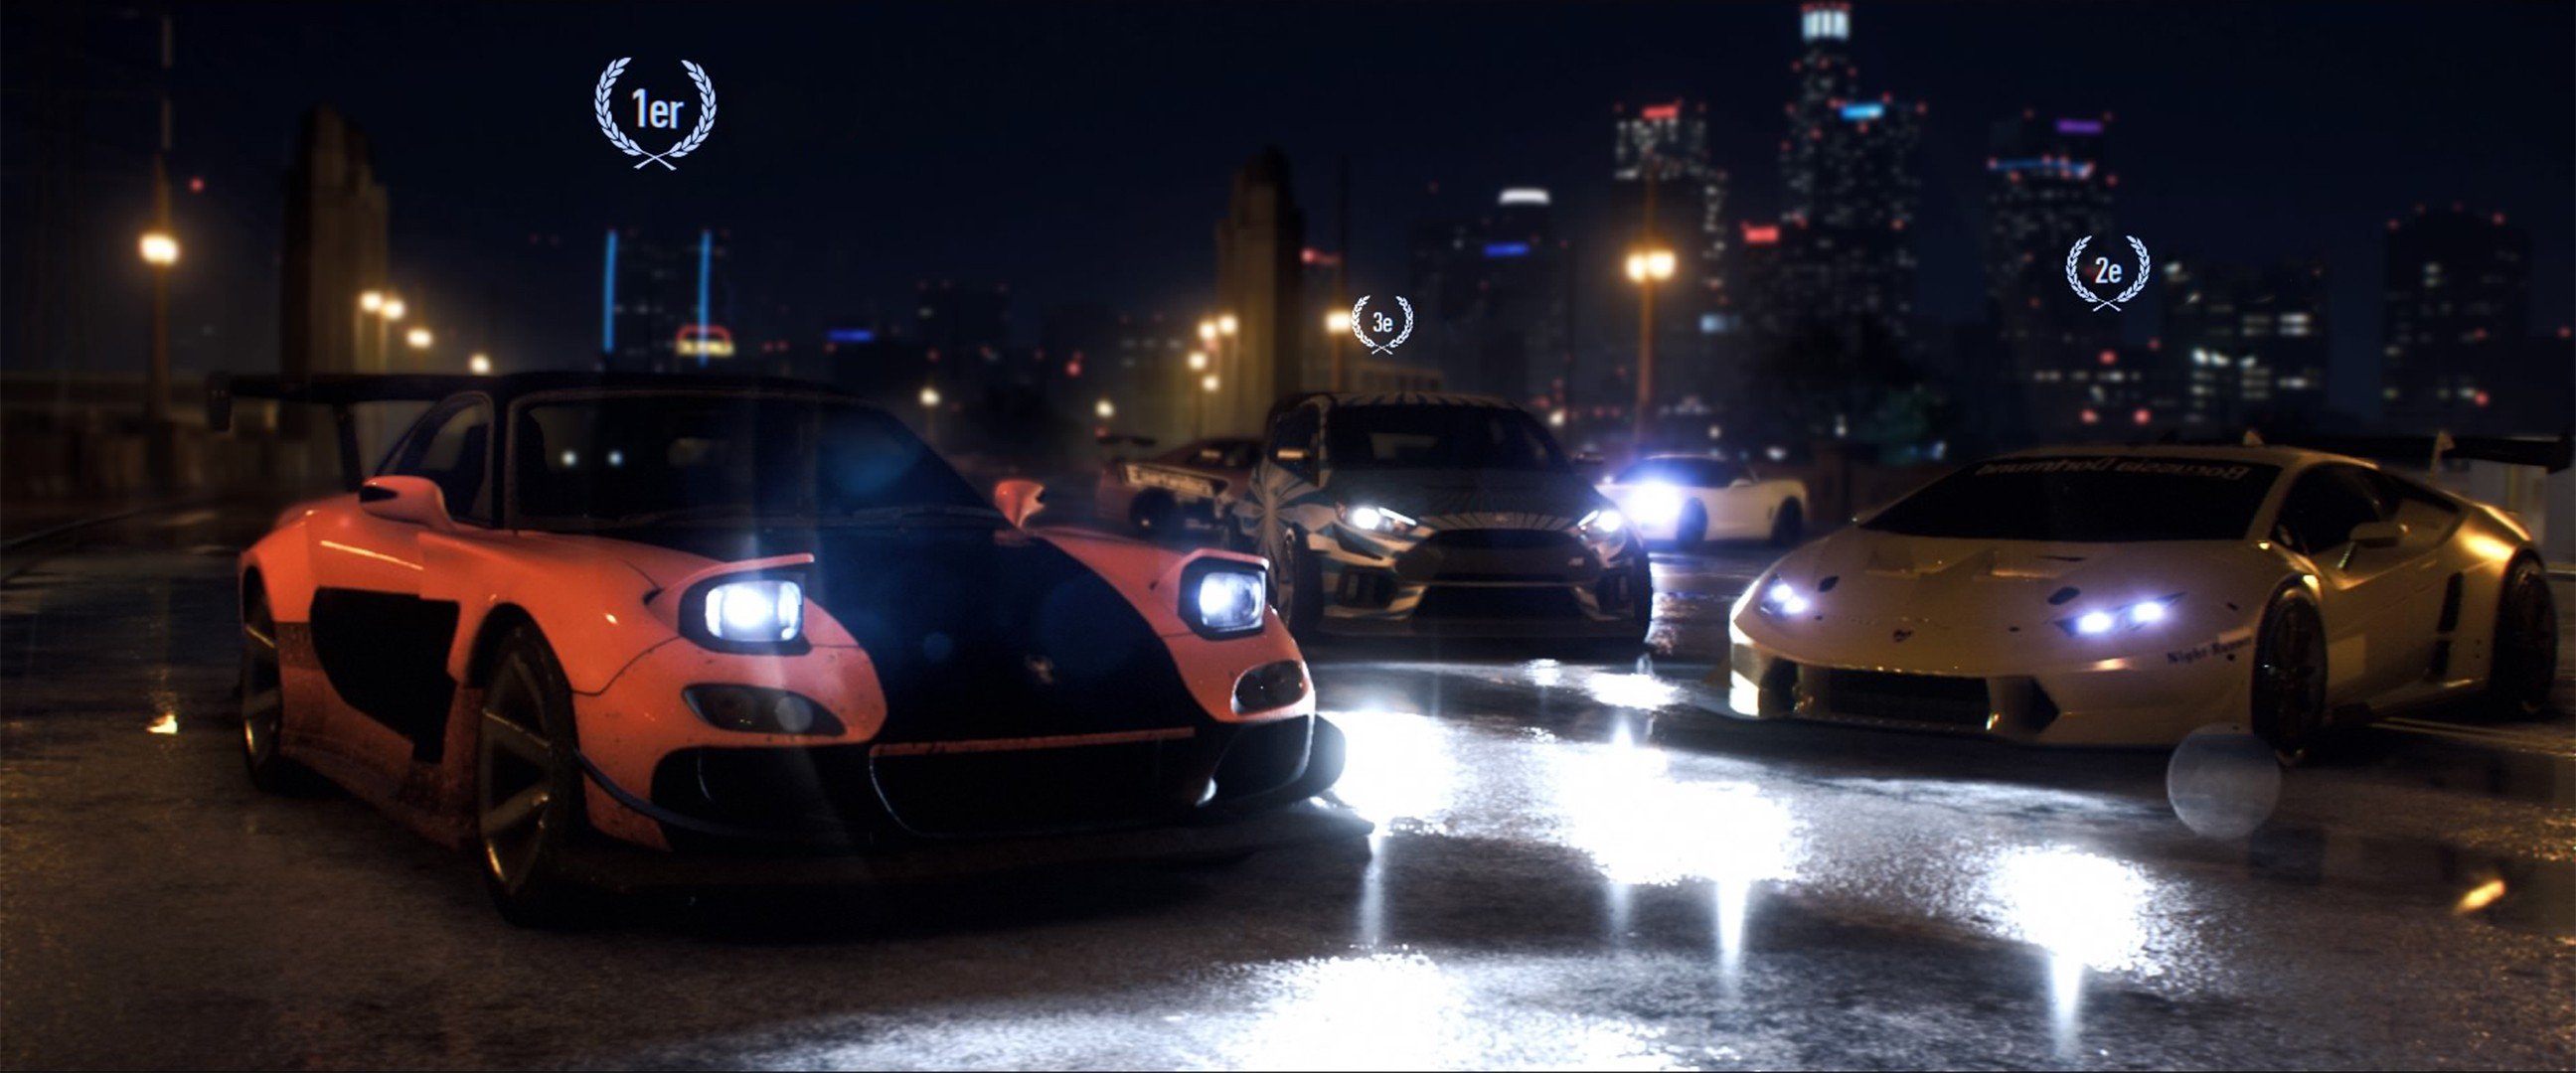 mazda rx Tokyo drift, Need for Speed, Multiplayer Wallpaper HD / Desktop and Mobile Background